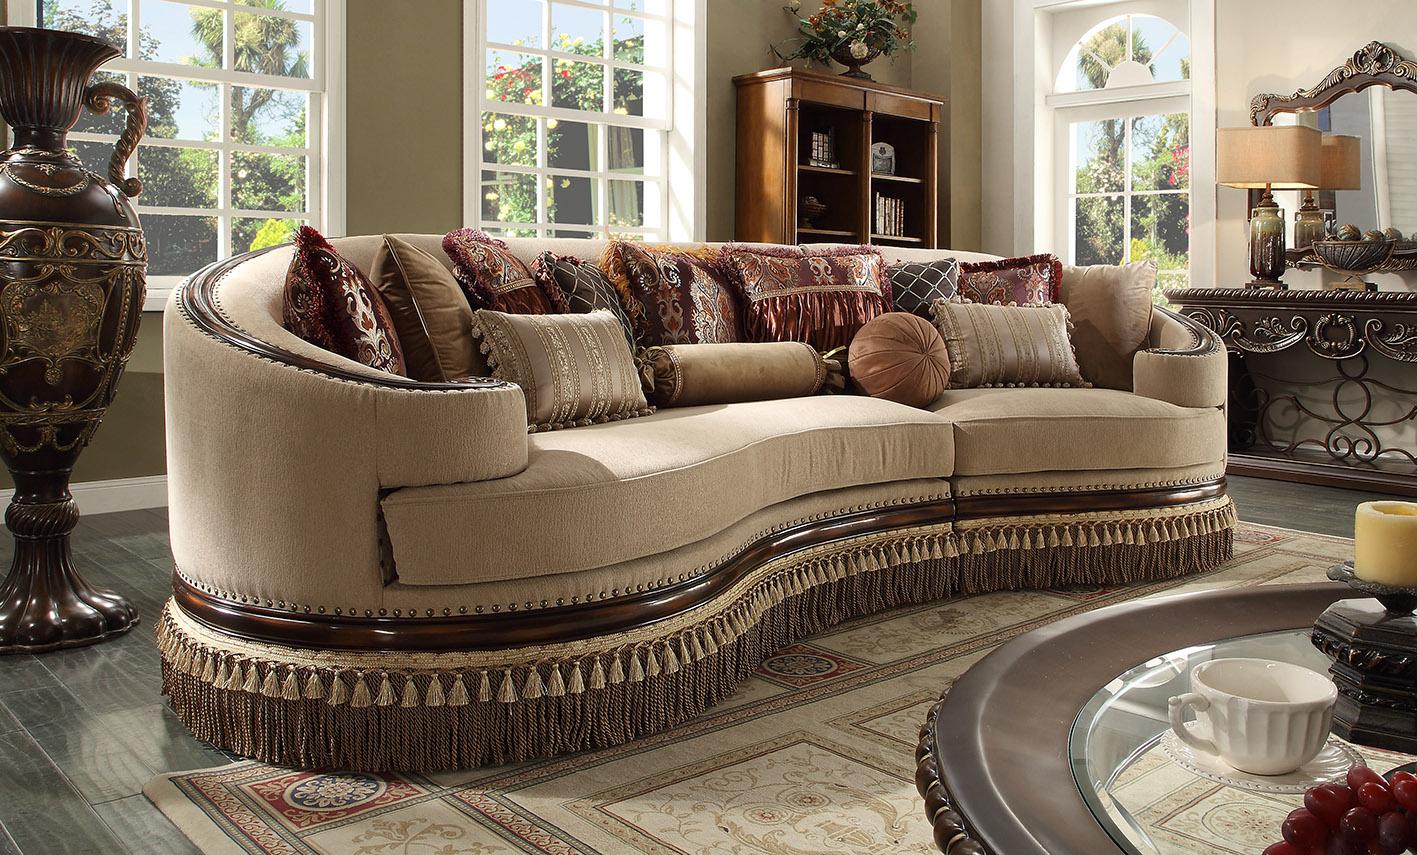 

    
Homey Design HD-1629 Victorian Upholstery Cappuccino Sectional Living Room Set Sofa and two Chairs 3Pcs
